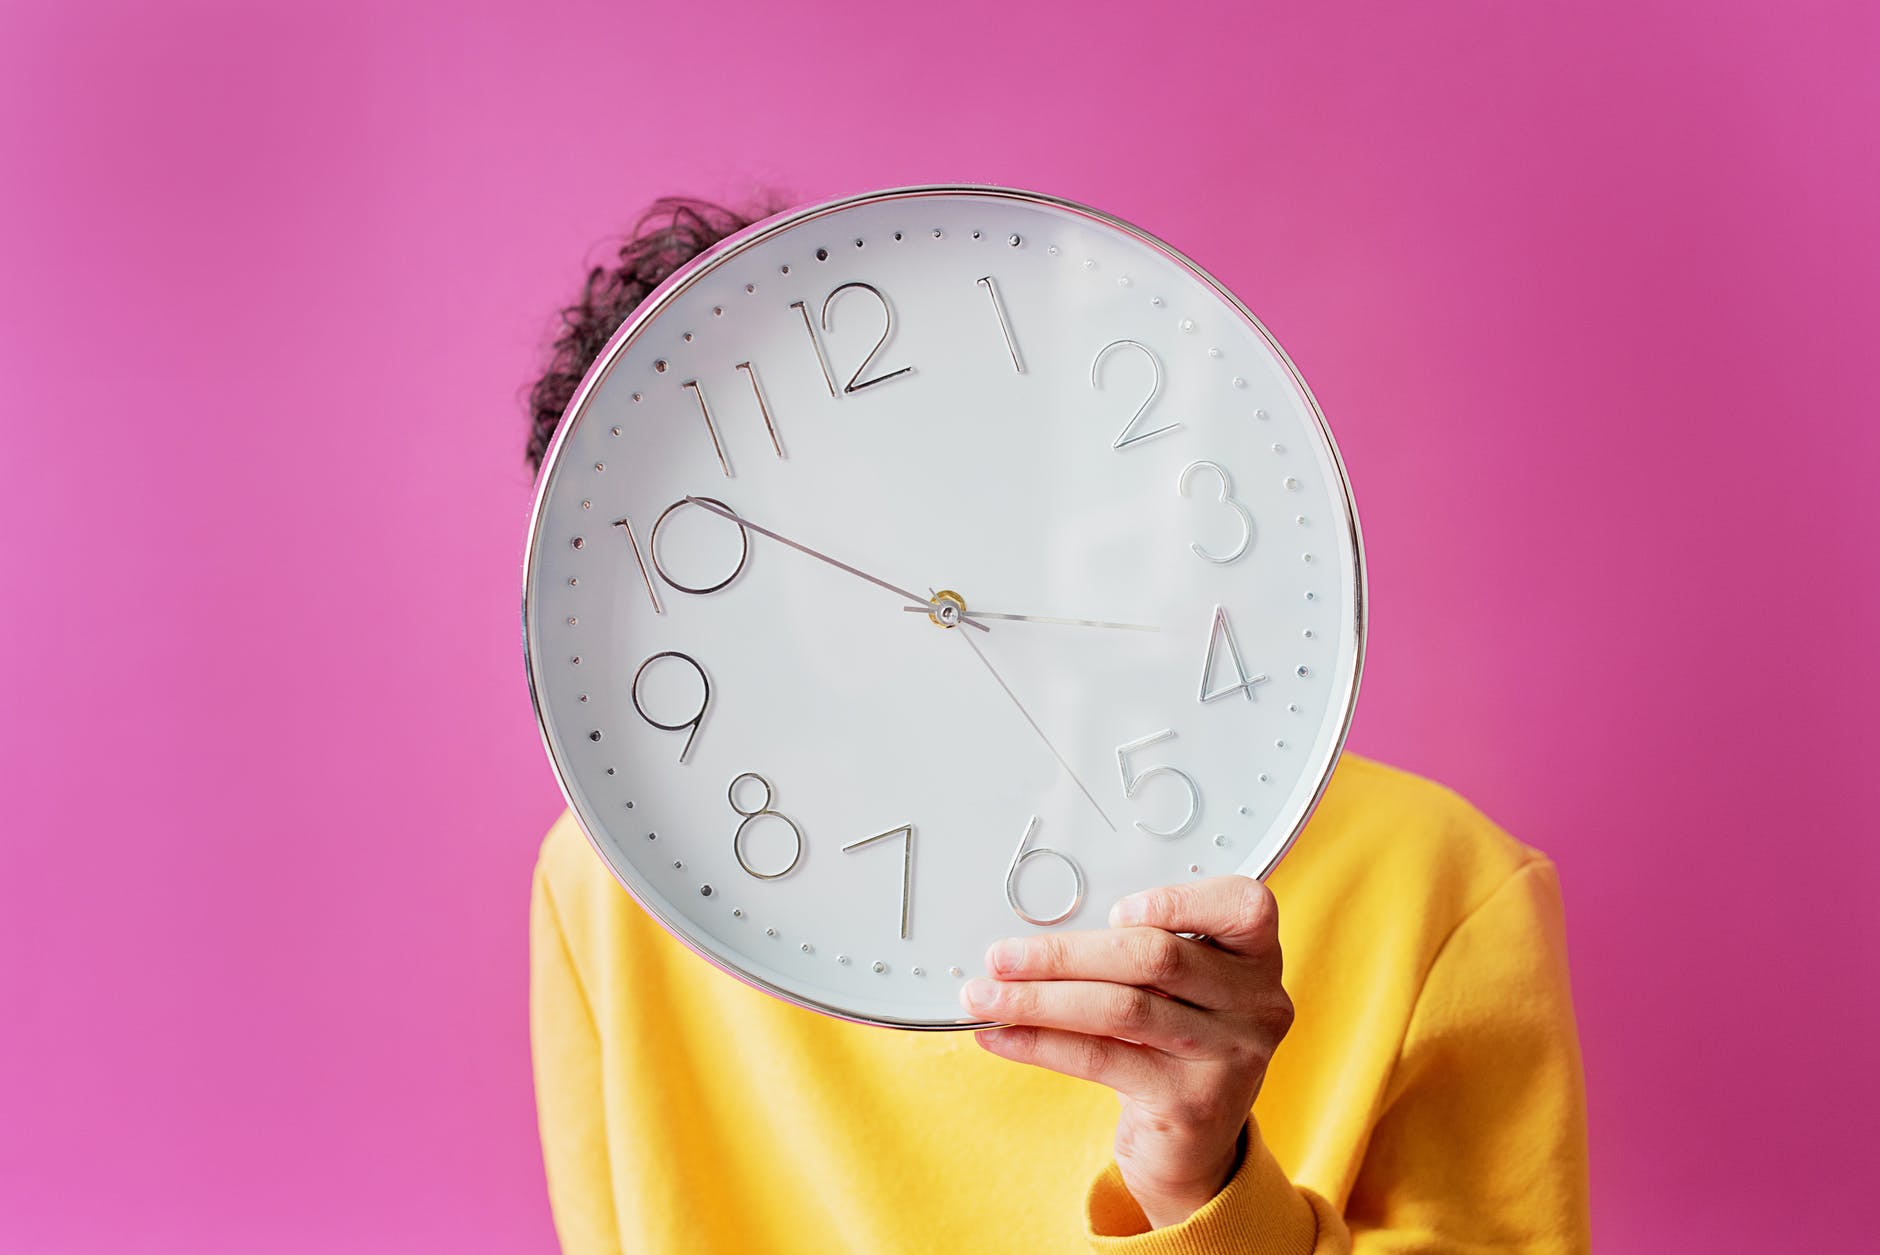 person holding an analog wall clock with purple background